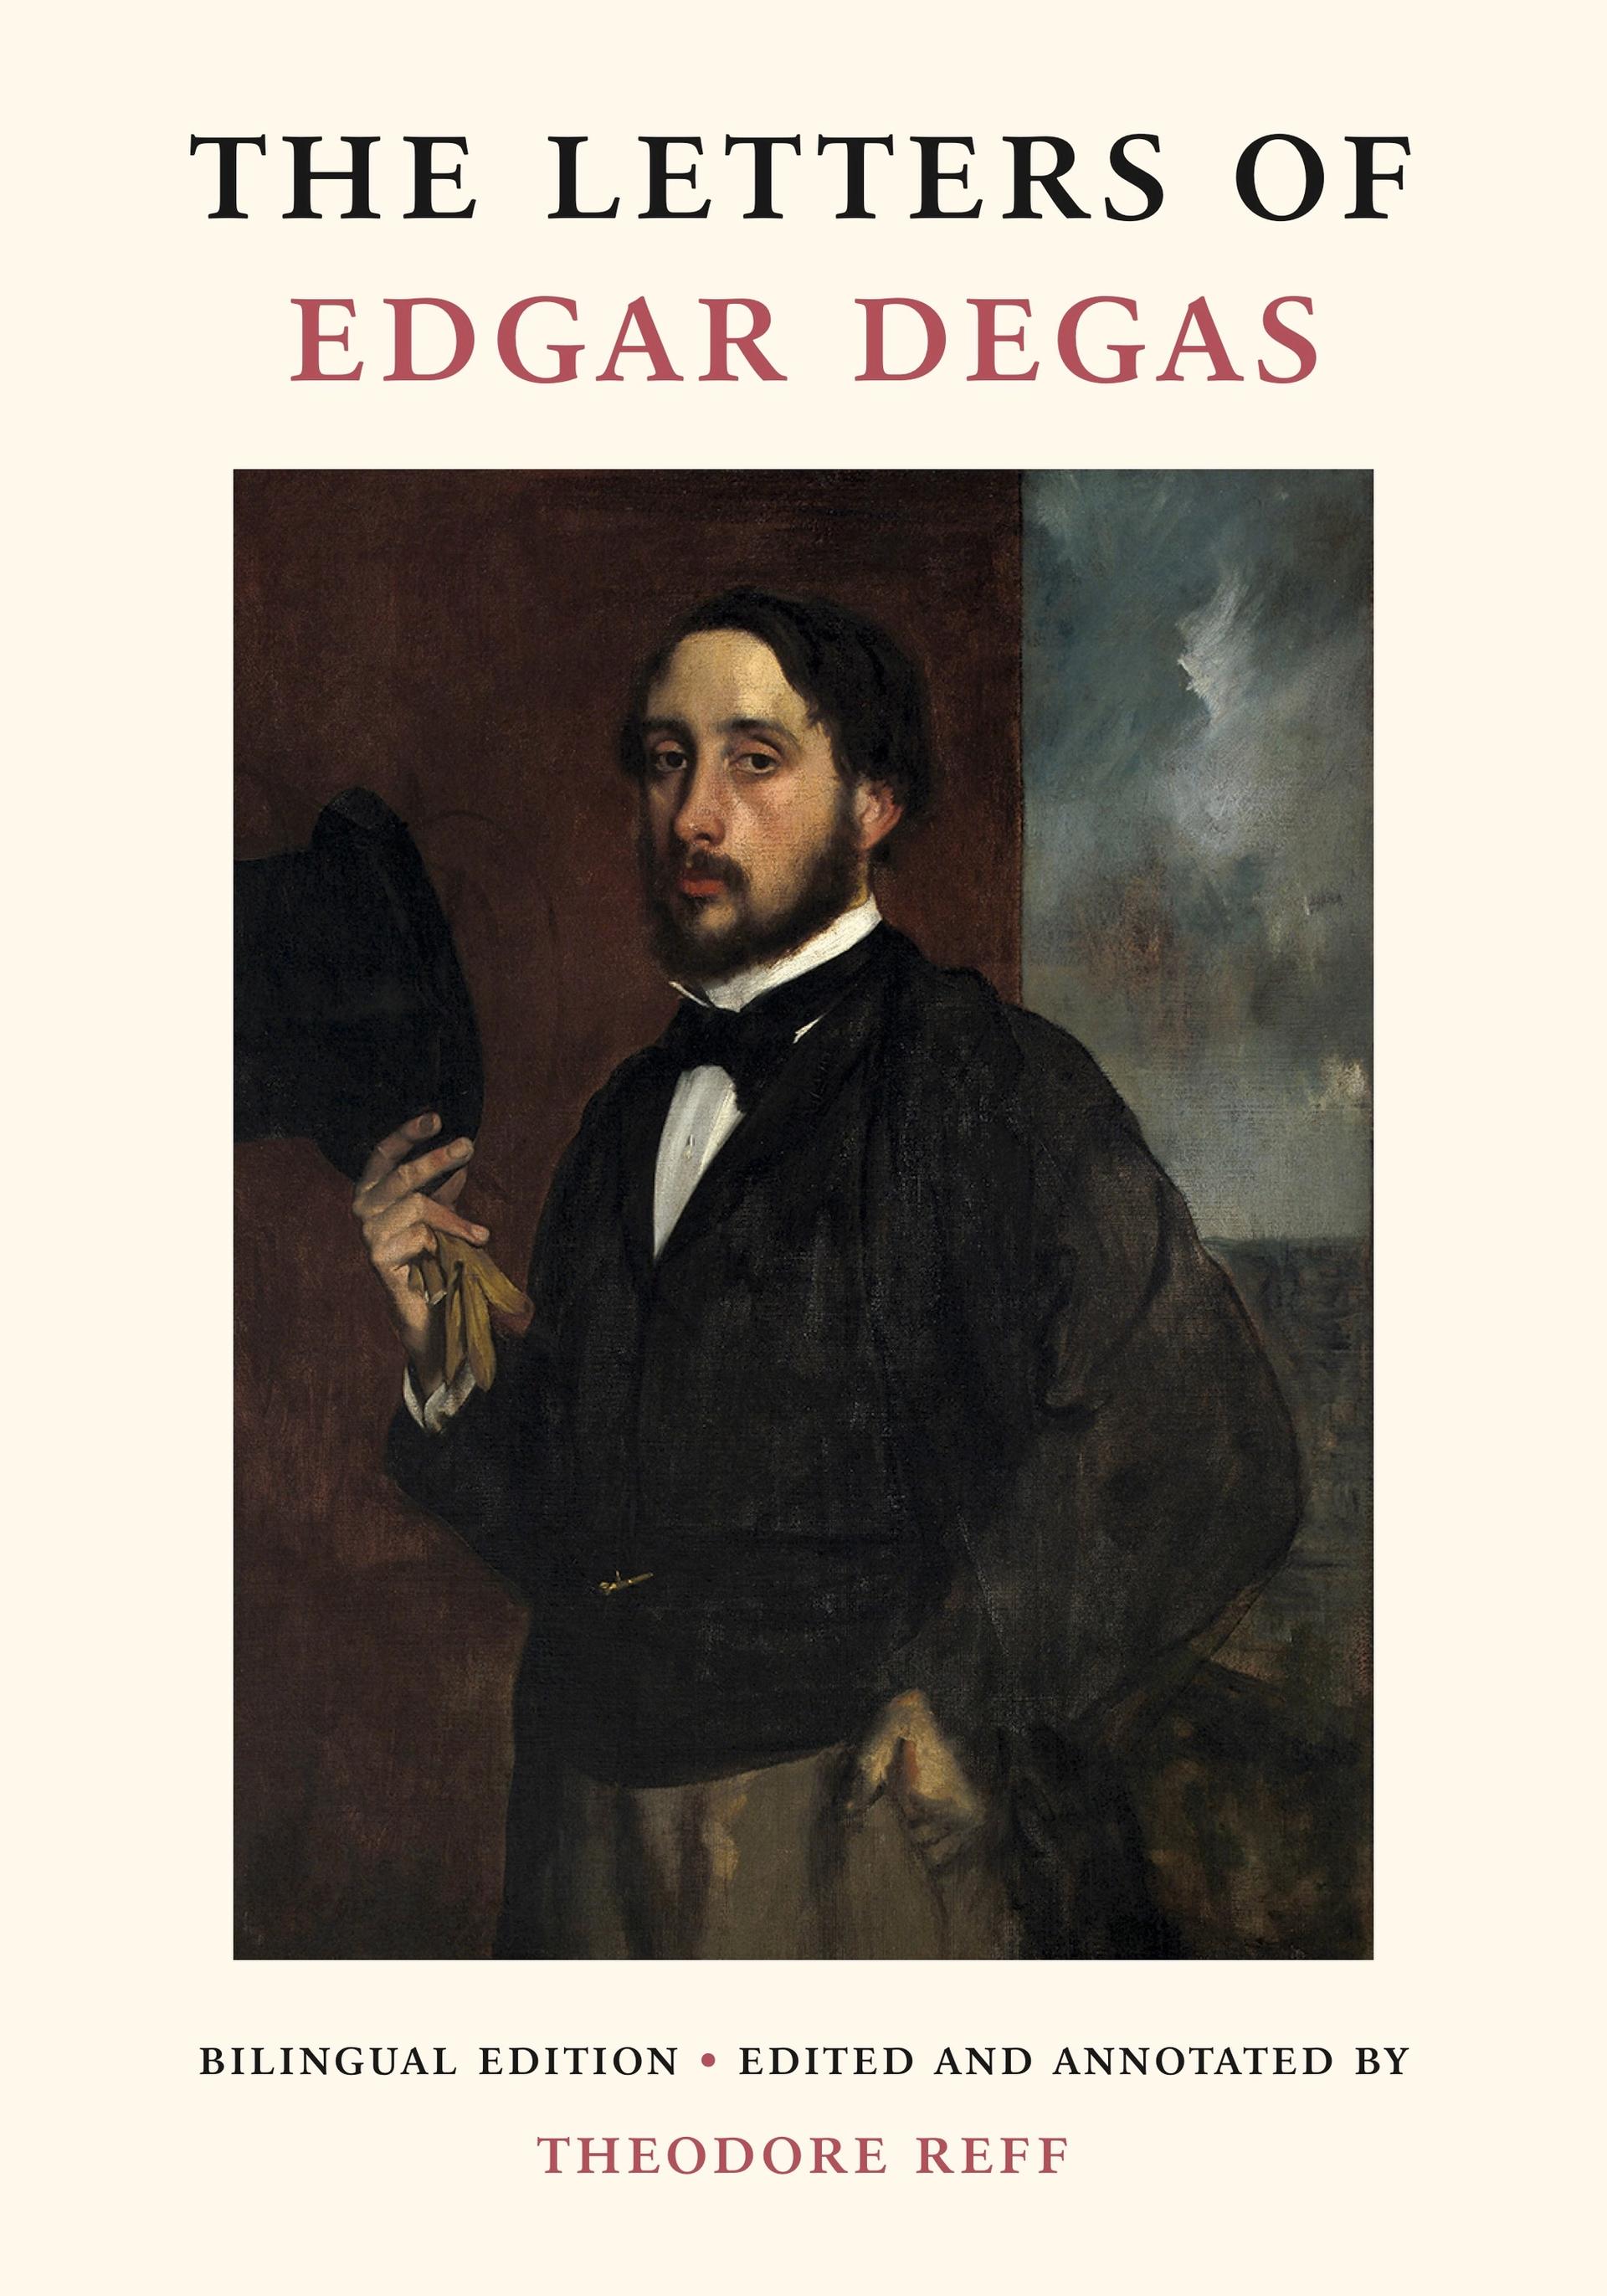 The cover of the book The Letters of Edgar Degas, edited by Theodore Reff, due to be published on 30 April Courtesy of Wildenstein Plattner Institute, New York, distributed by Pennsylvania State University Press